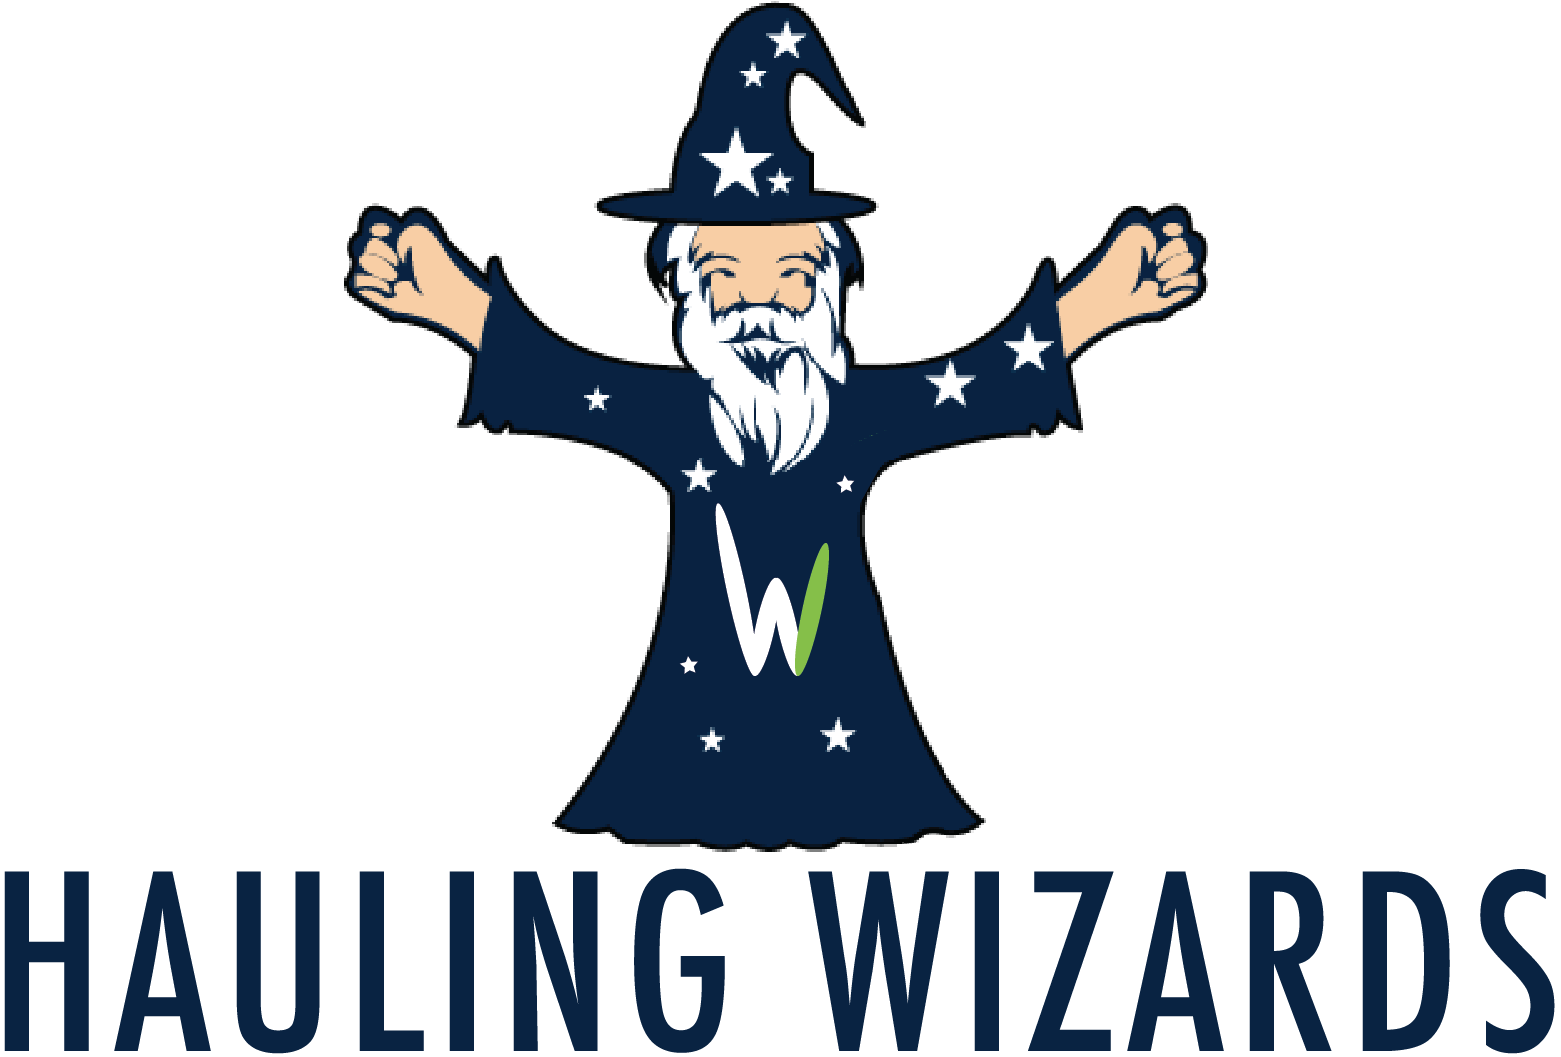 https://www.haulingwizards.com/wp-content/uploads/2022/10/cropped-hauling-wizards-logo.png